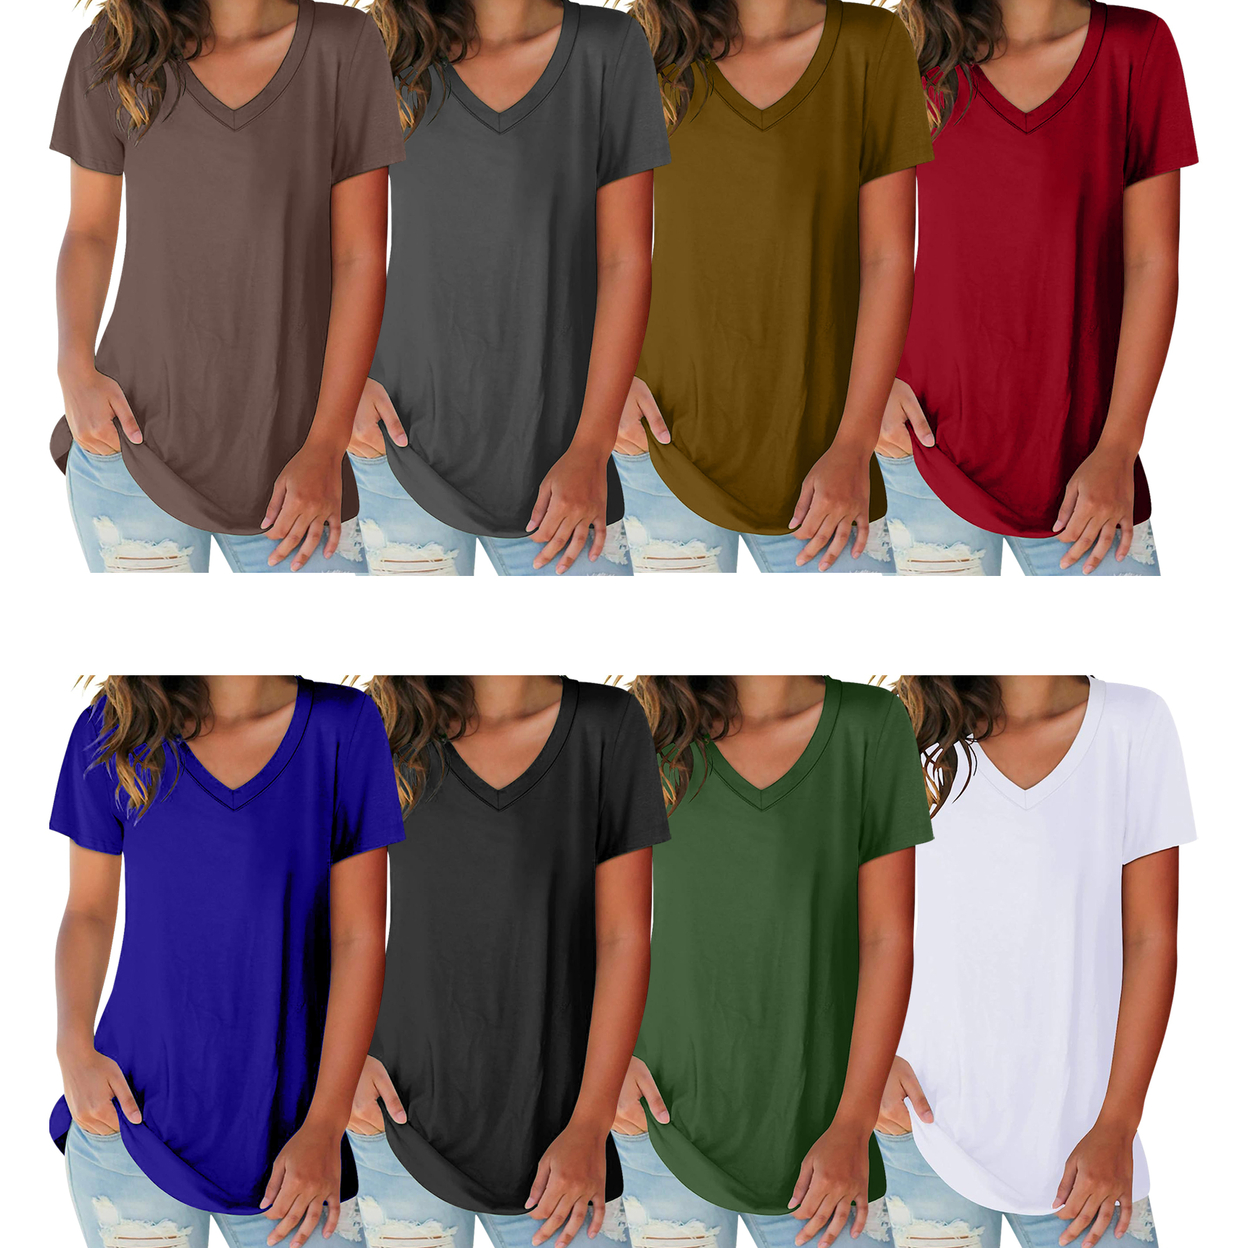 2-Pack: Women's Ultra Soft Smooth Cotton Blend Basic V-Neck Short Sleeve Shirts - Grey & Red, Small